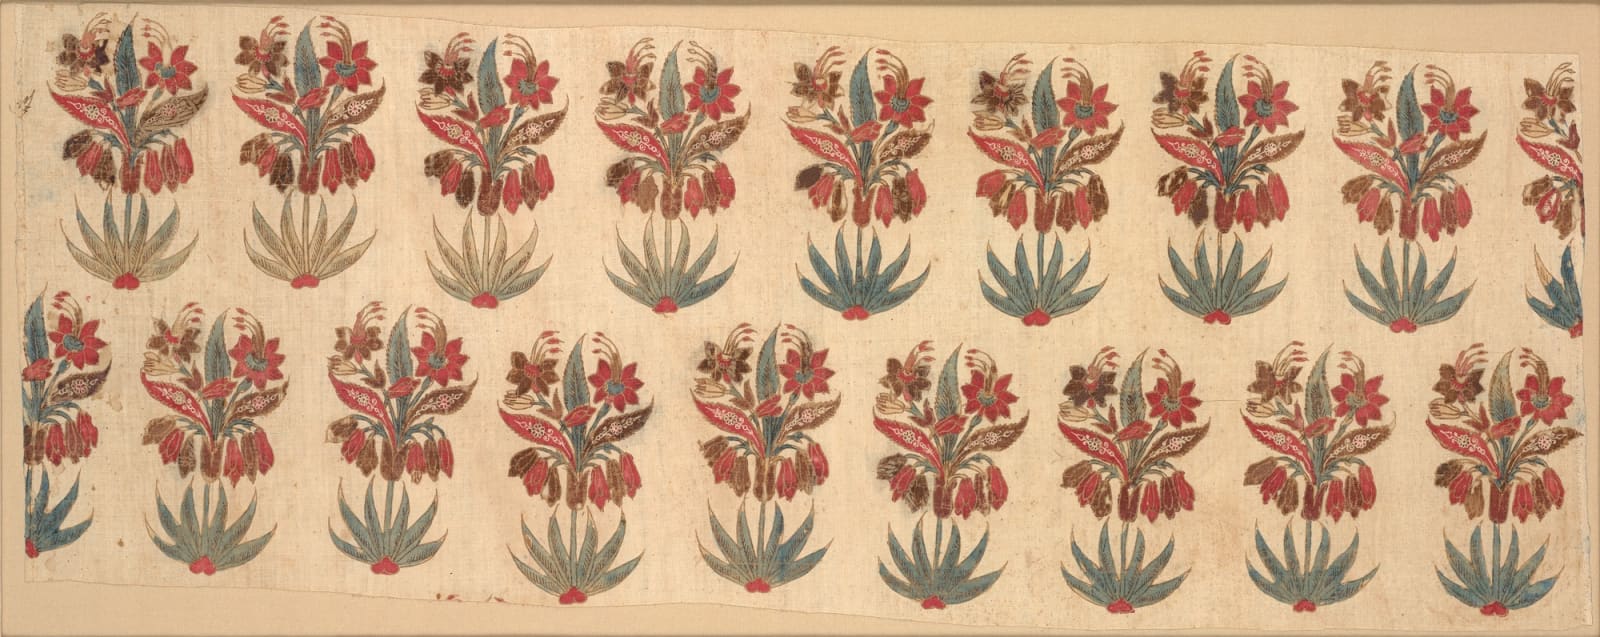 Two rows of flowering plants, South-east India, probably Petaboli, for the Golconda or Mughal court at Amber, mid 17th century